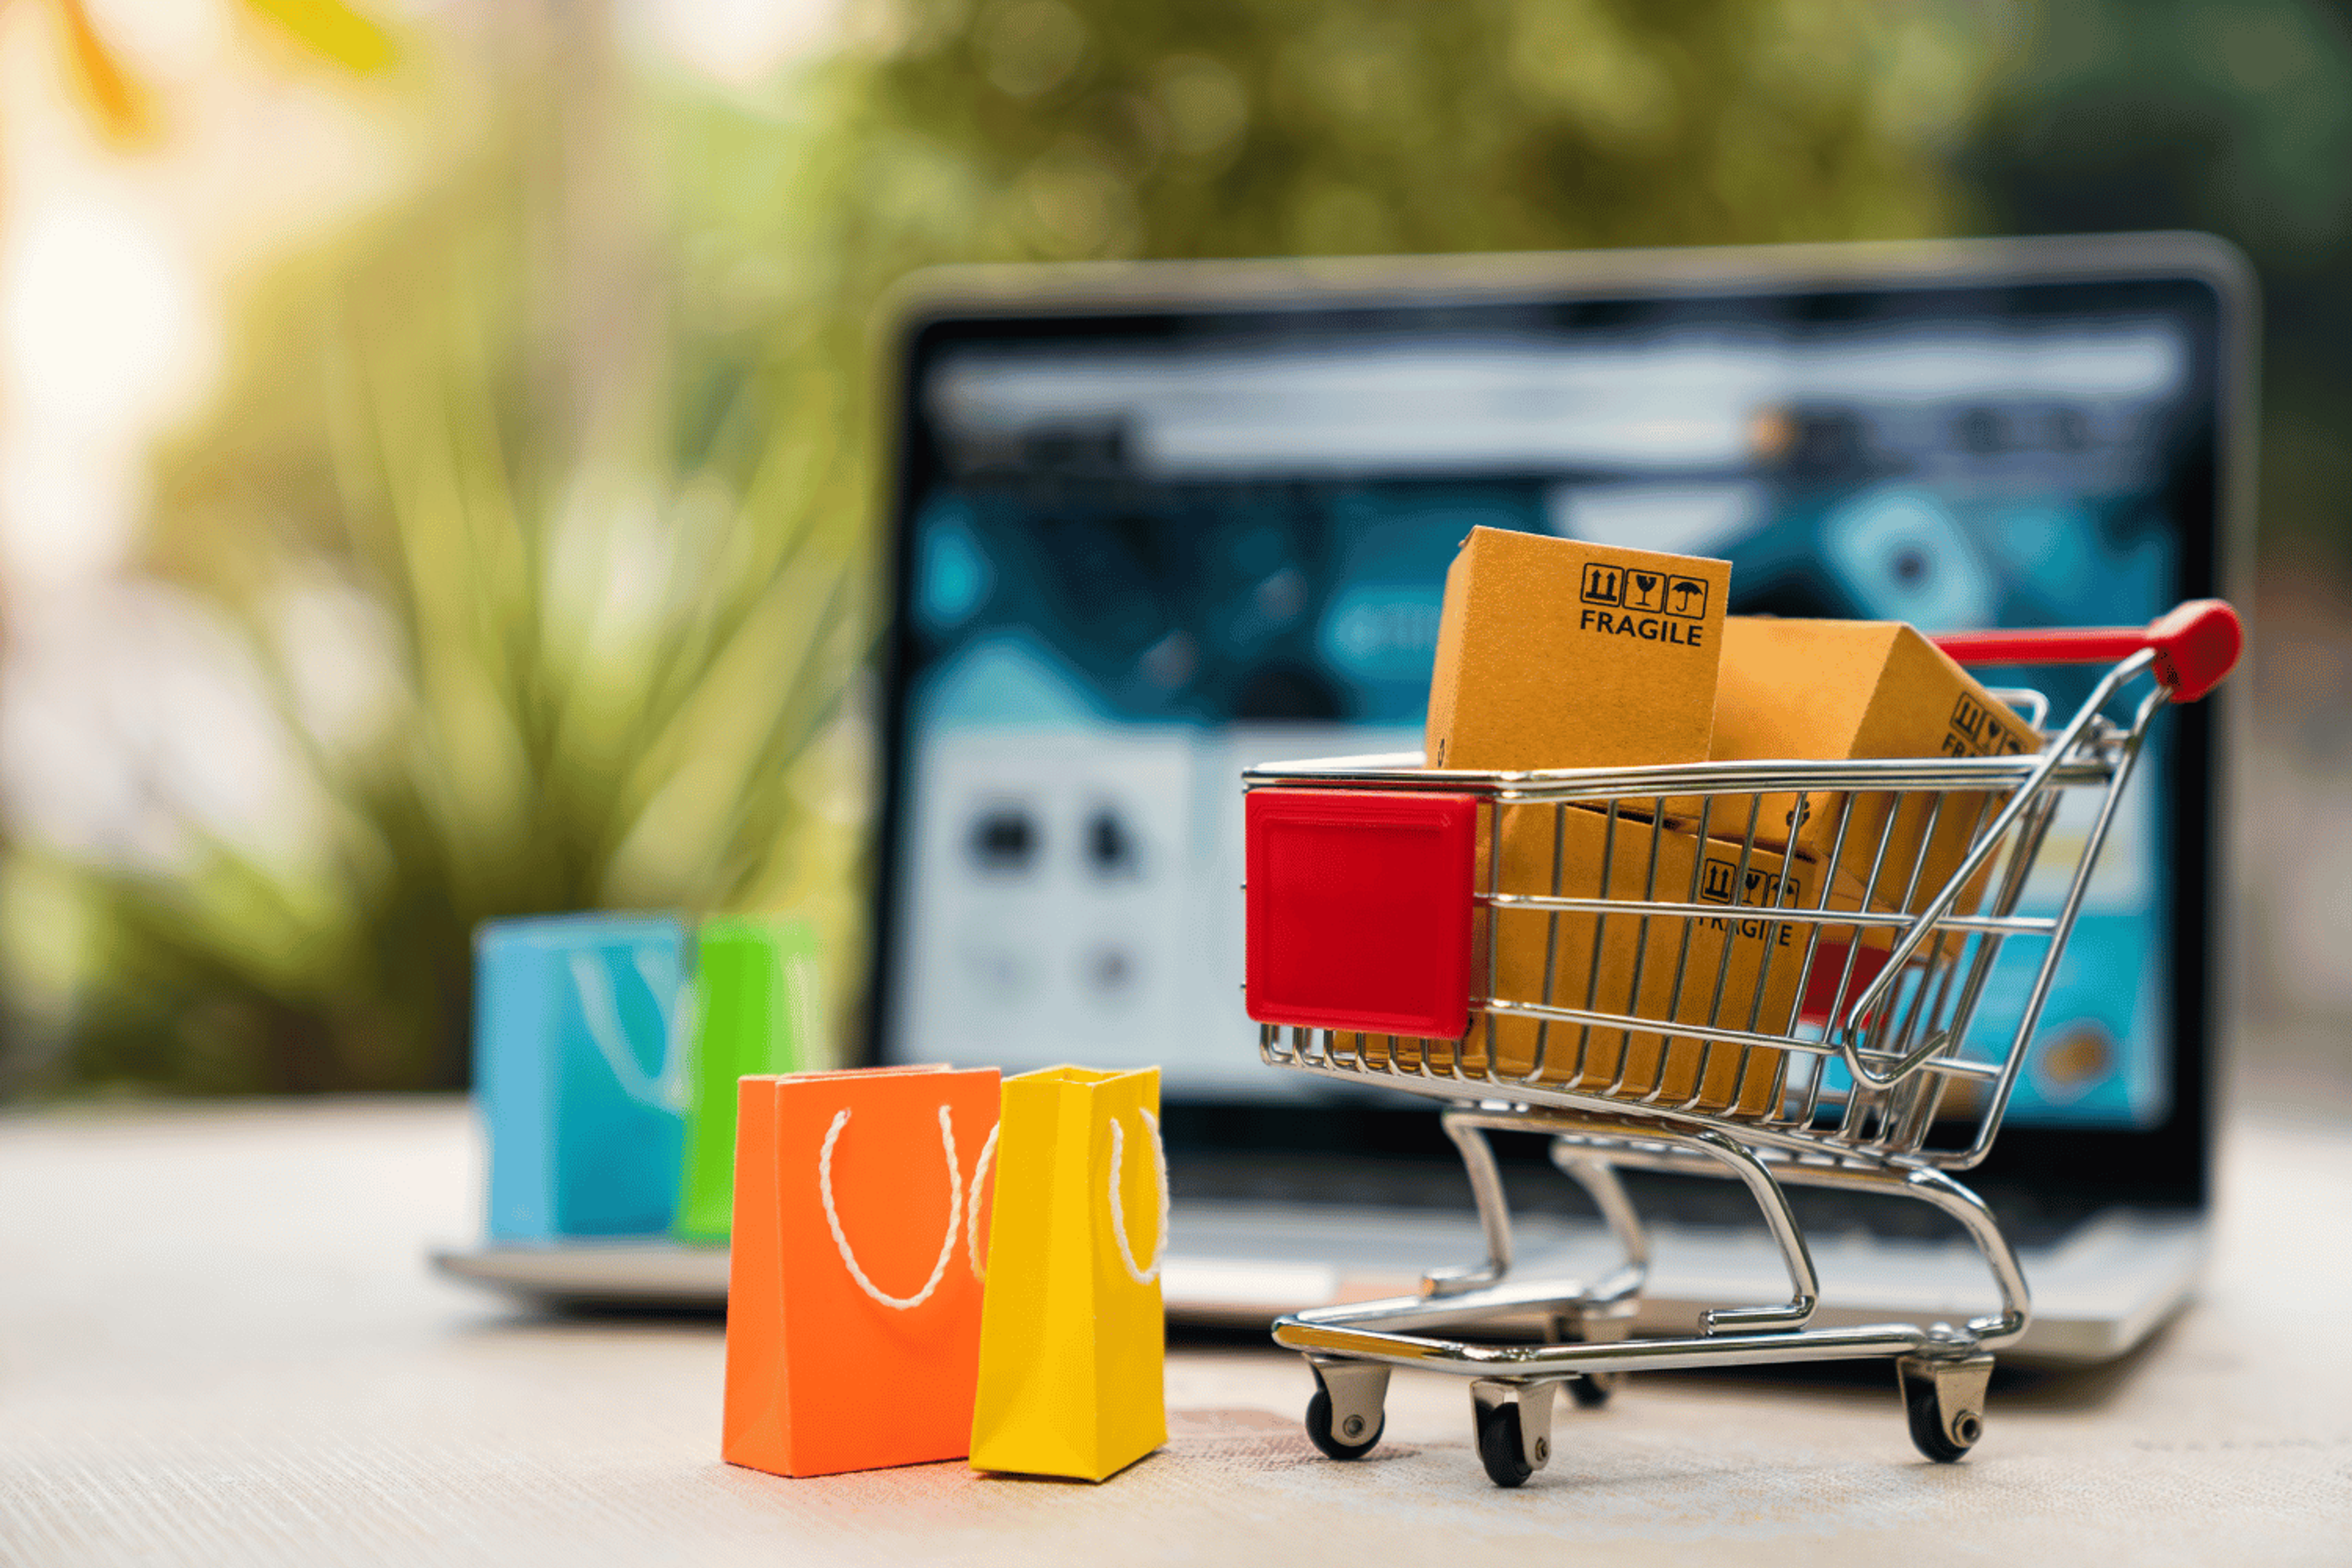 Miniature shopping cart and shopping bags with full of items in front of a laptop